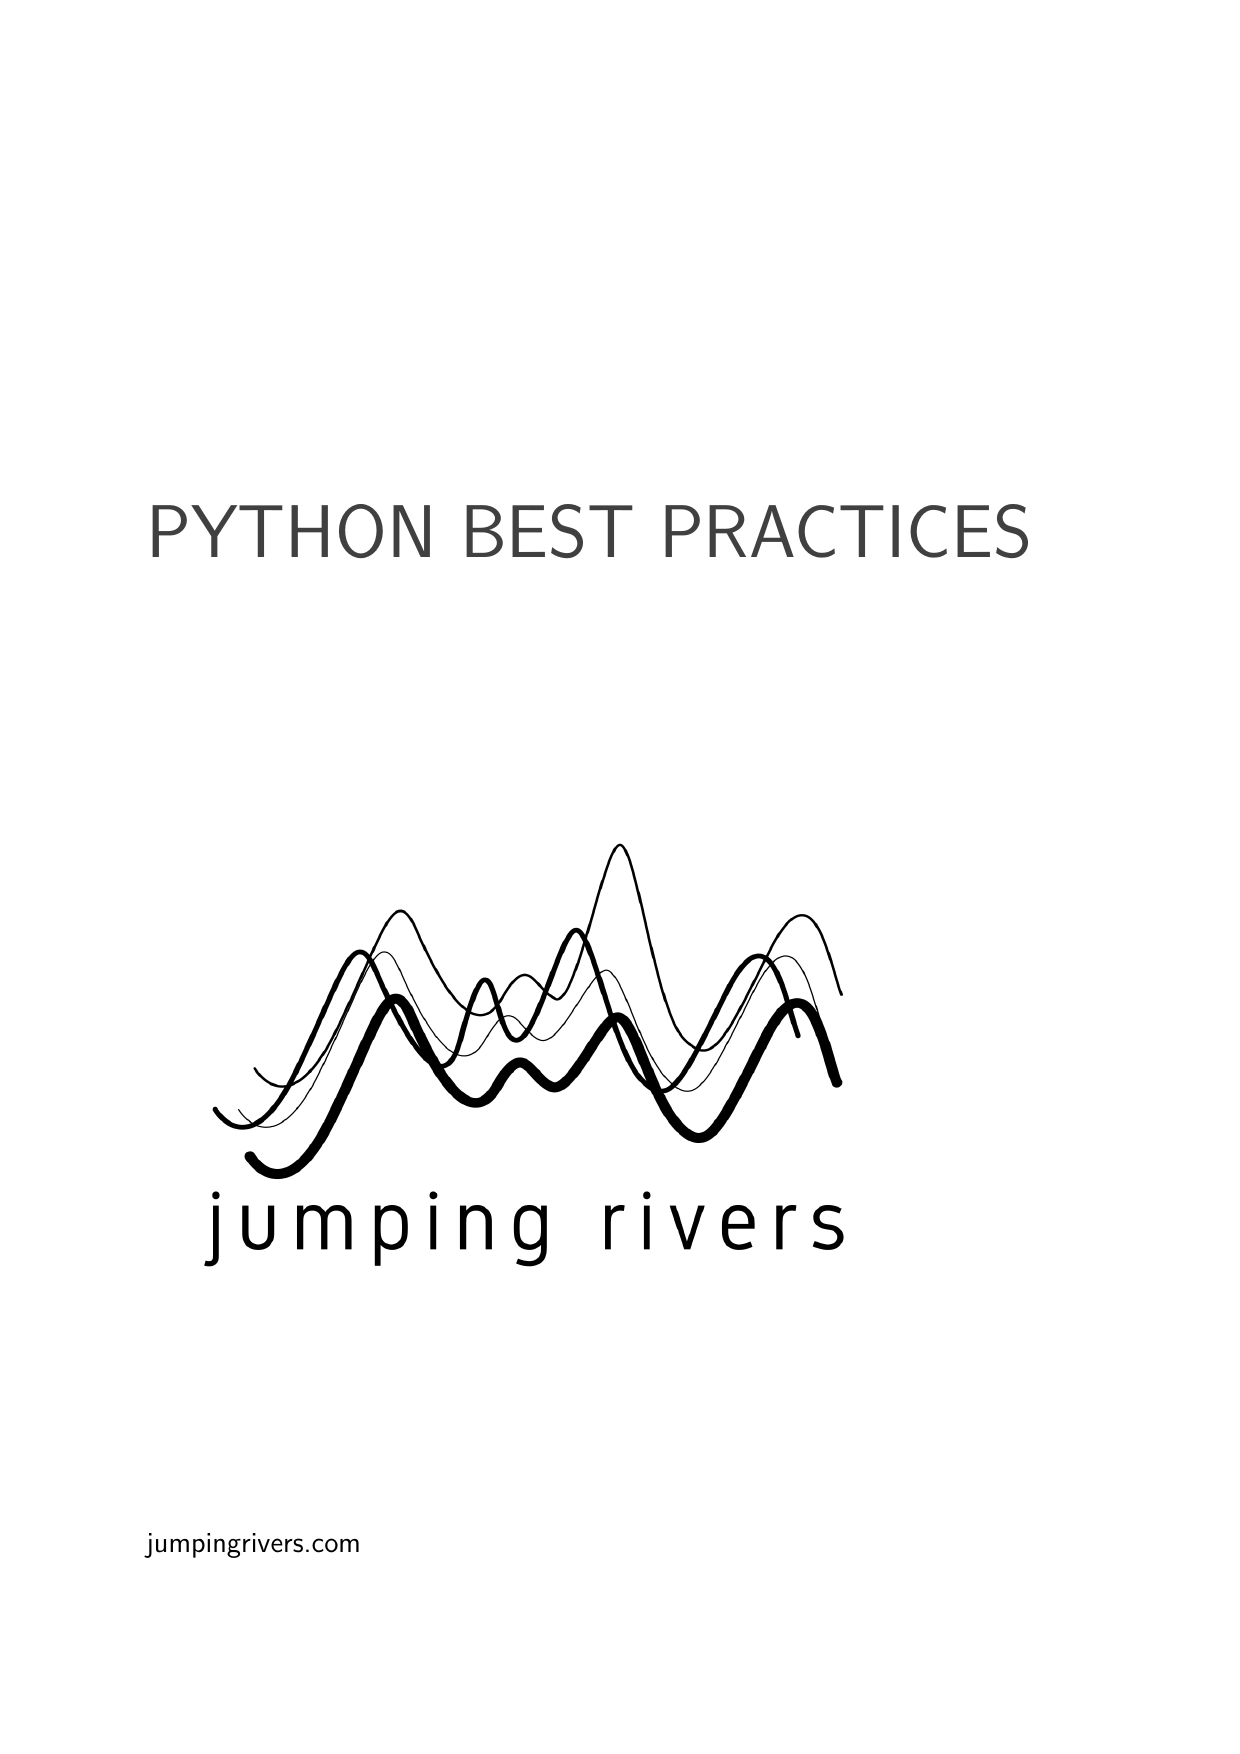 Example course material for 'Python Best Practices'